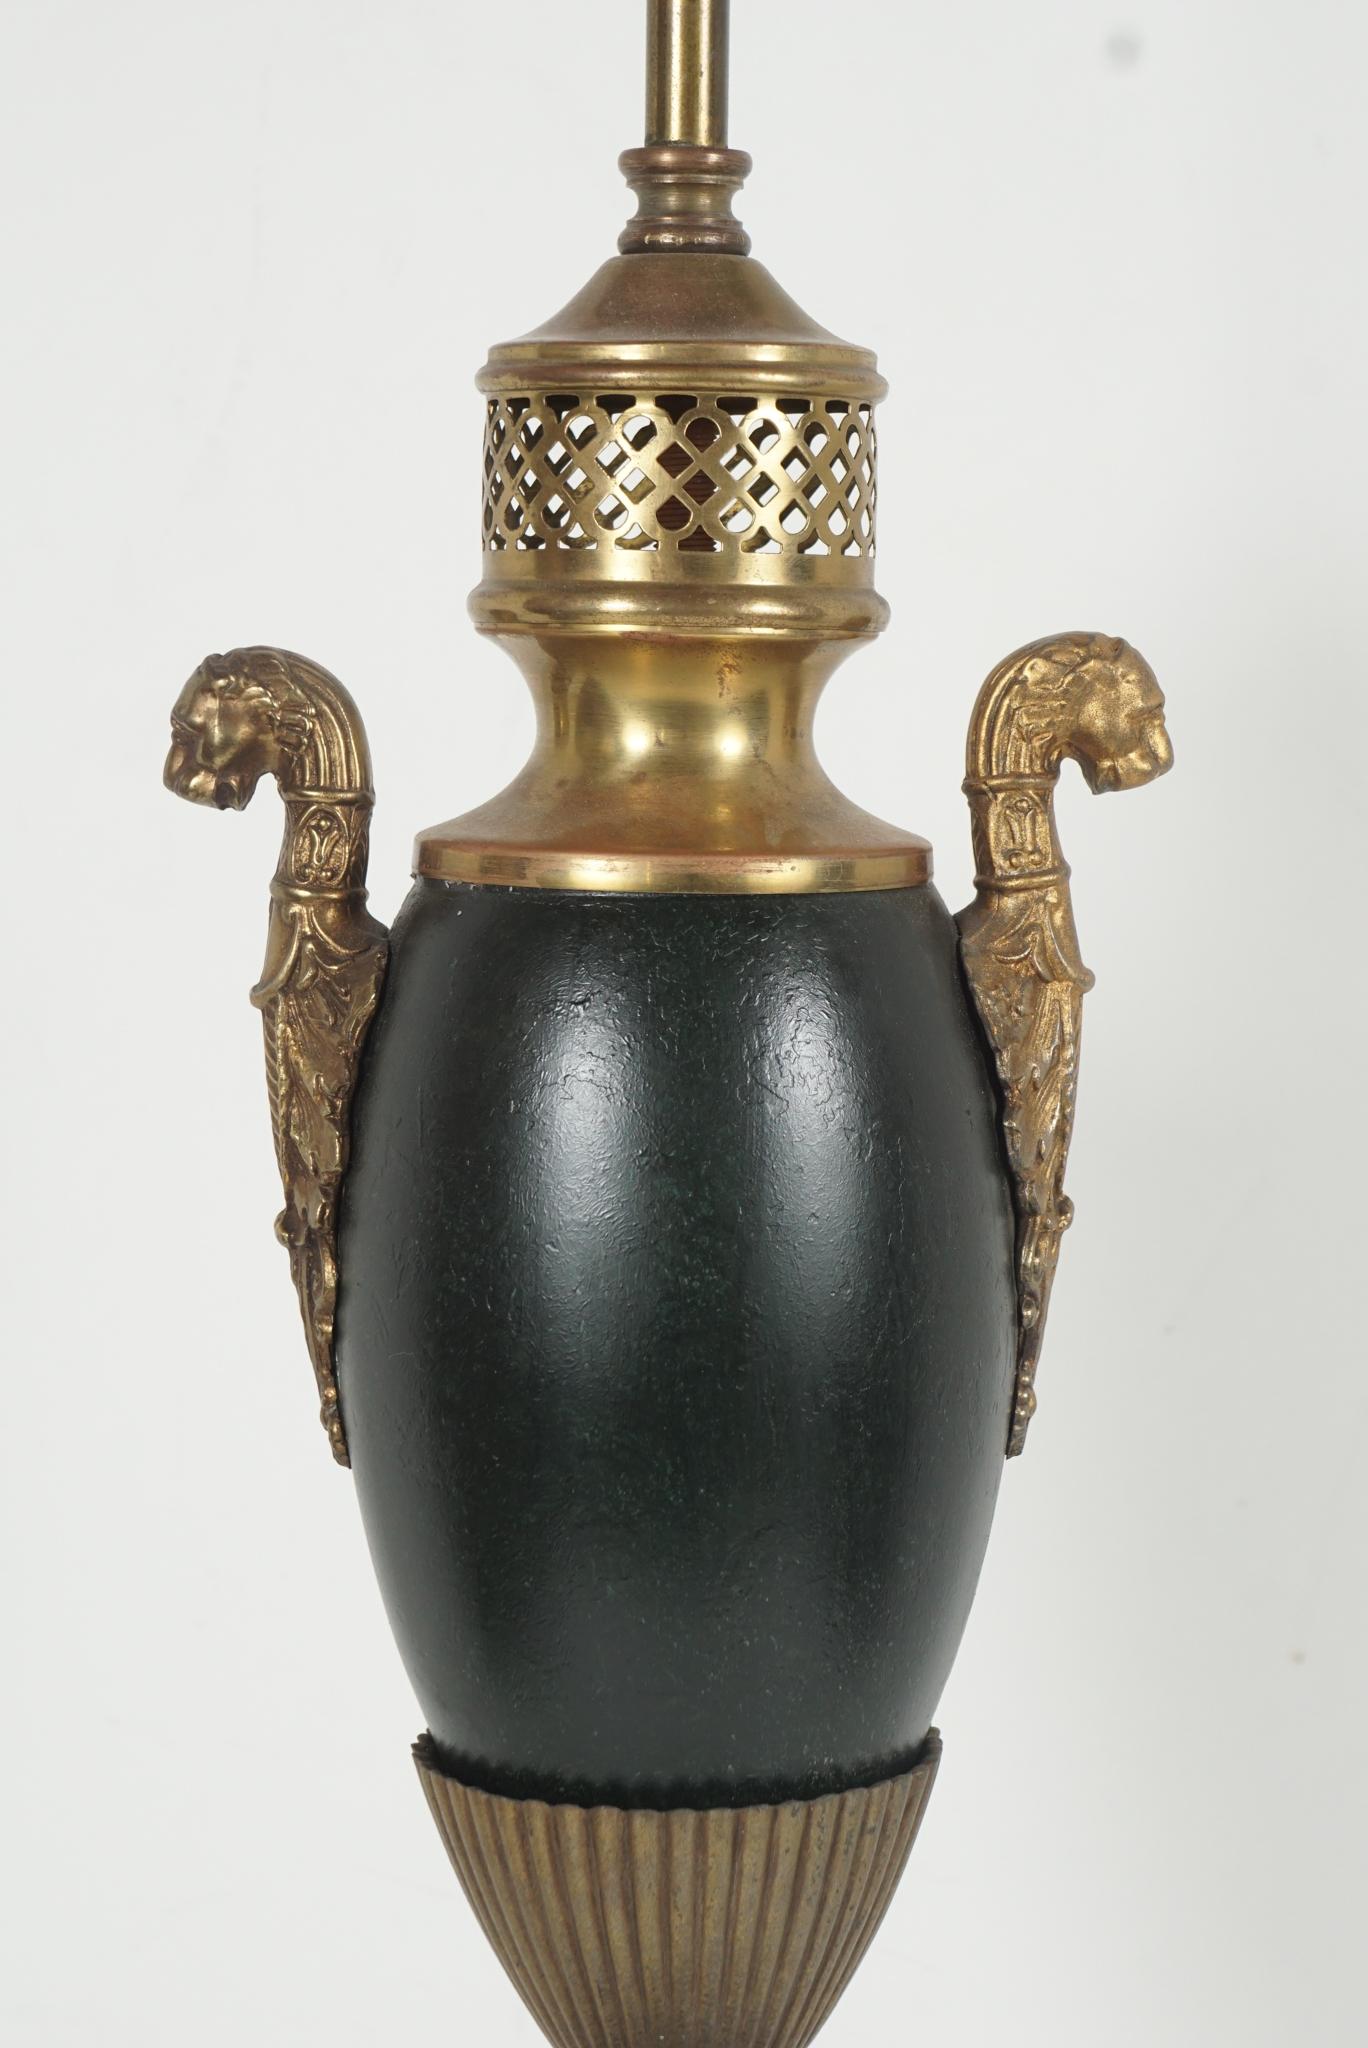 20th Century French Tole Late 19th to Early 20th Carcel Lamp from the Estate of Bunny Mellon For Sale